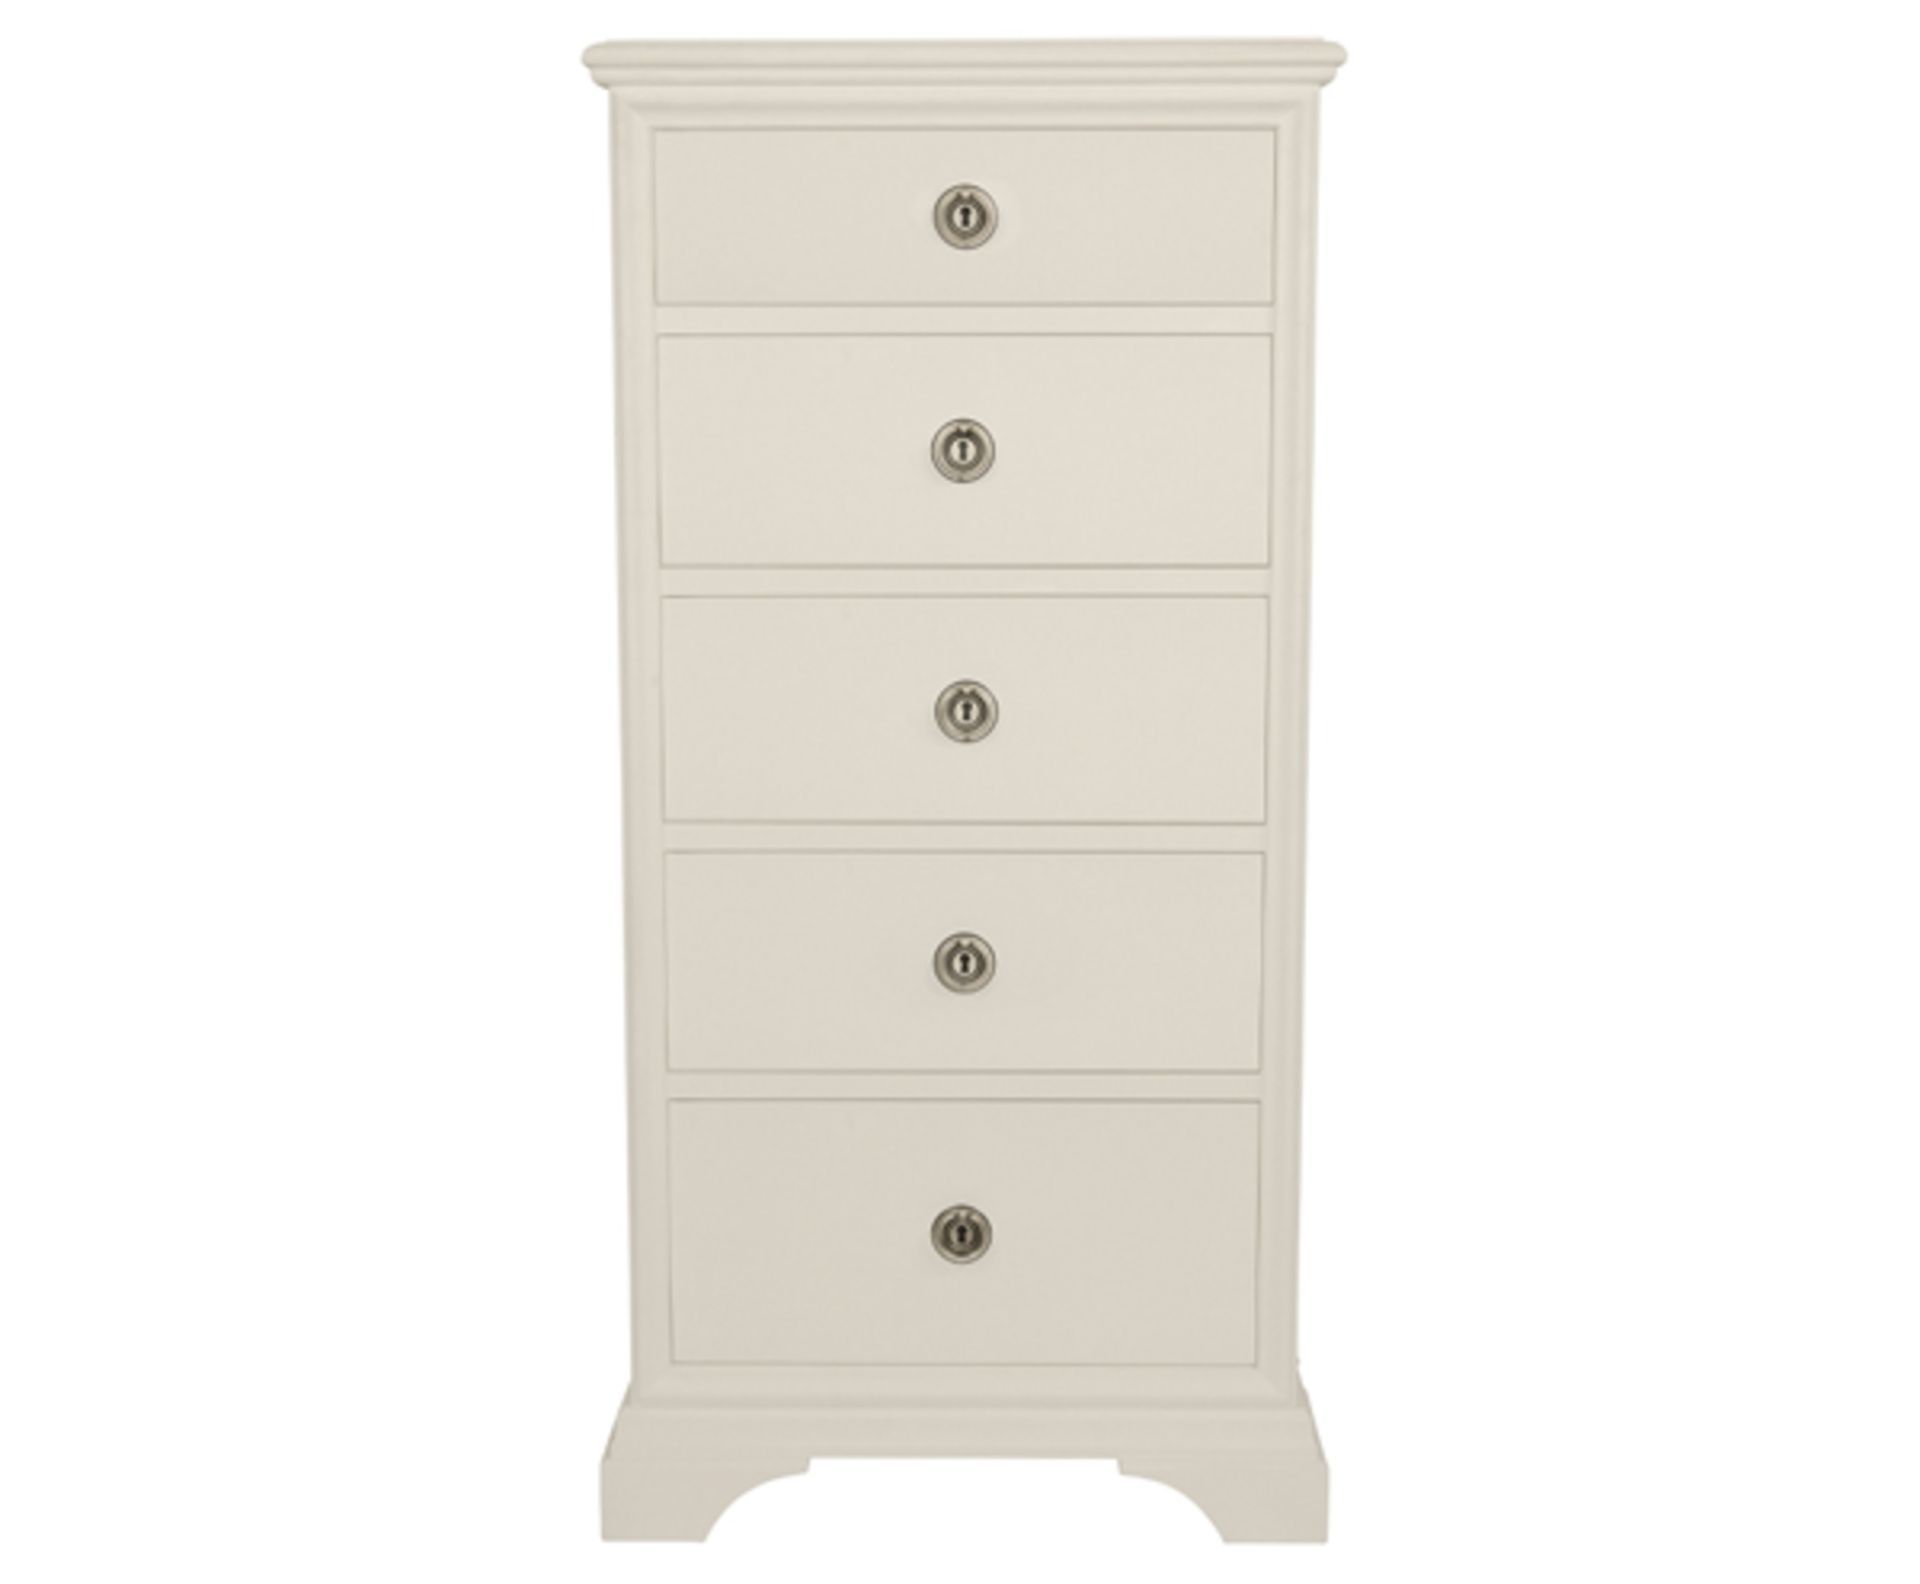 Laura Ashley Gabrielle white 5 Drawer Tall Chest boasting classic French design with a hand brushed,